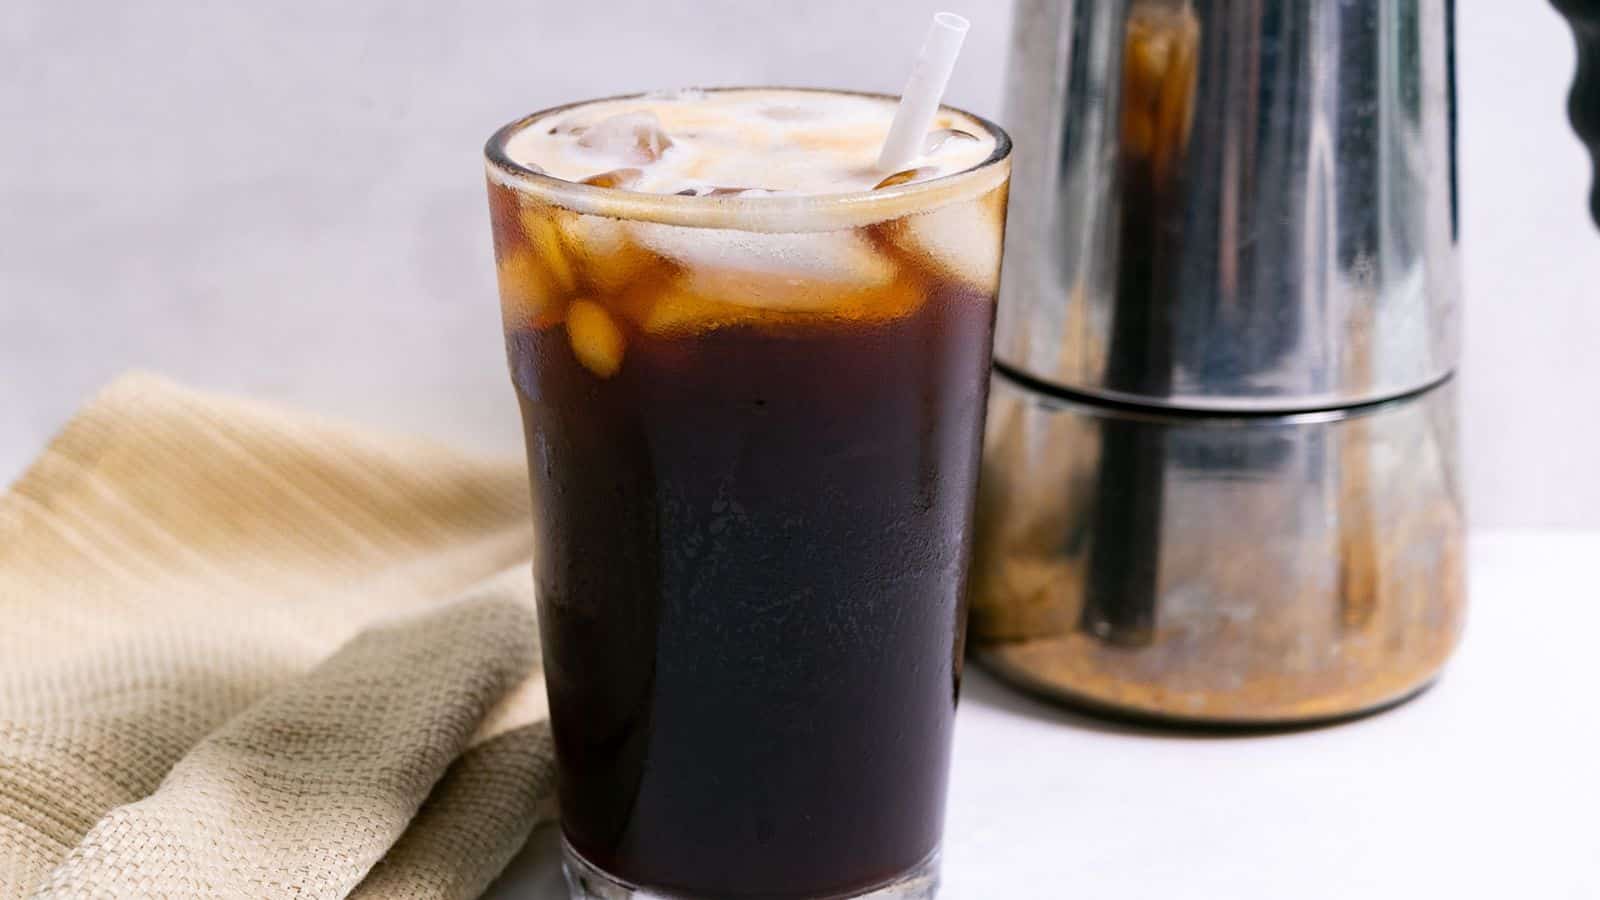 A glass of iced coffee with a straw, next to a coffee press and a beige napkin, on a light background.